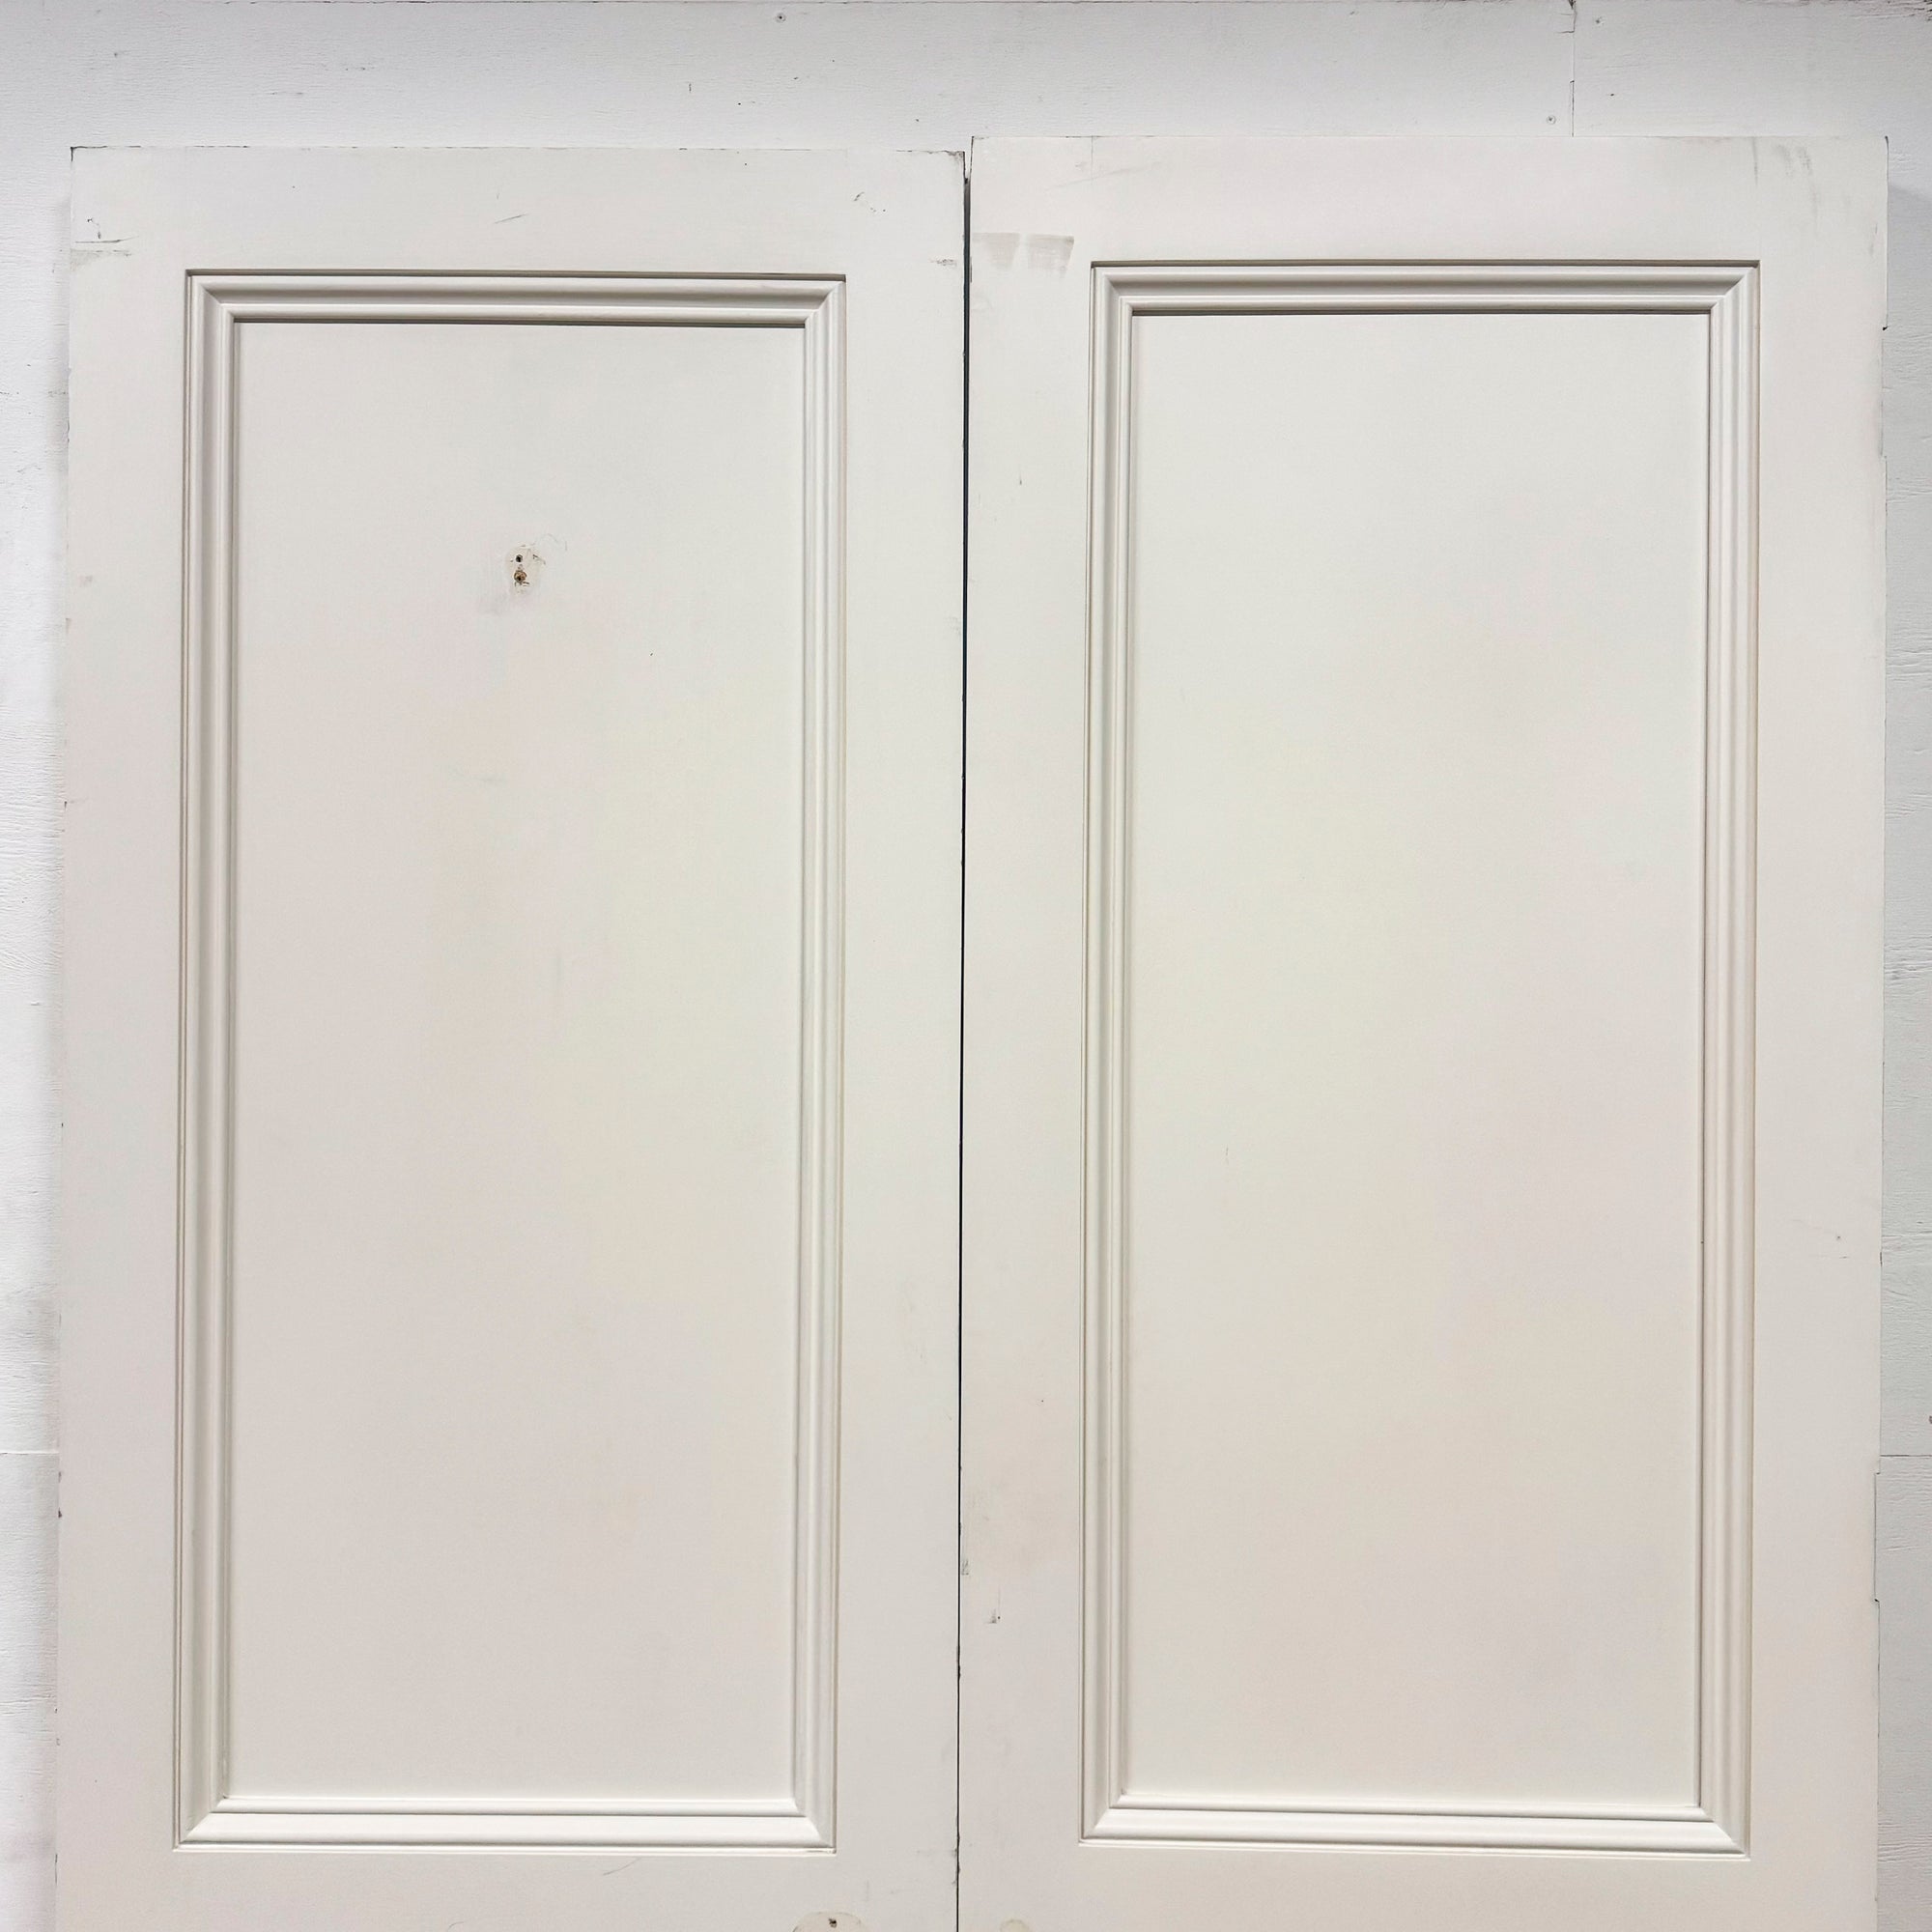 Reclaimed Tulip Wood Double Doors 231 x 146cm | The Architectural Forum